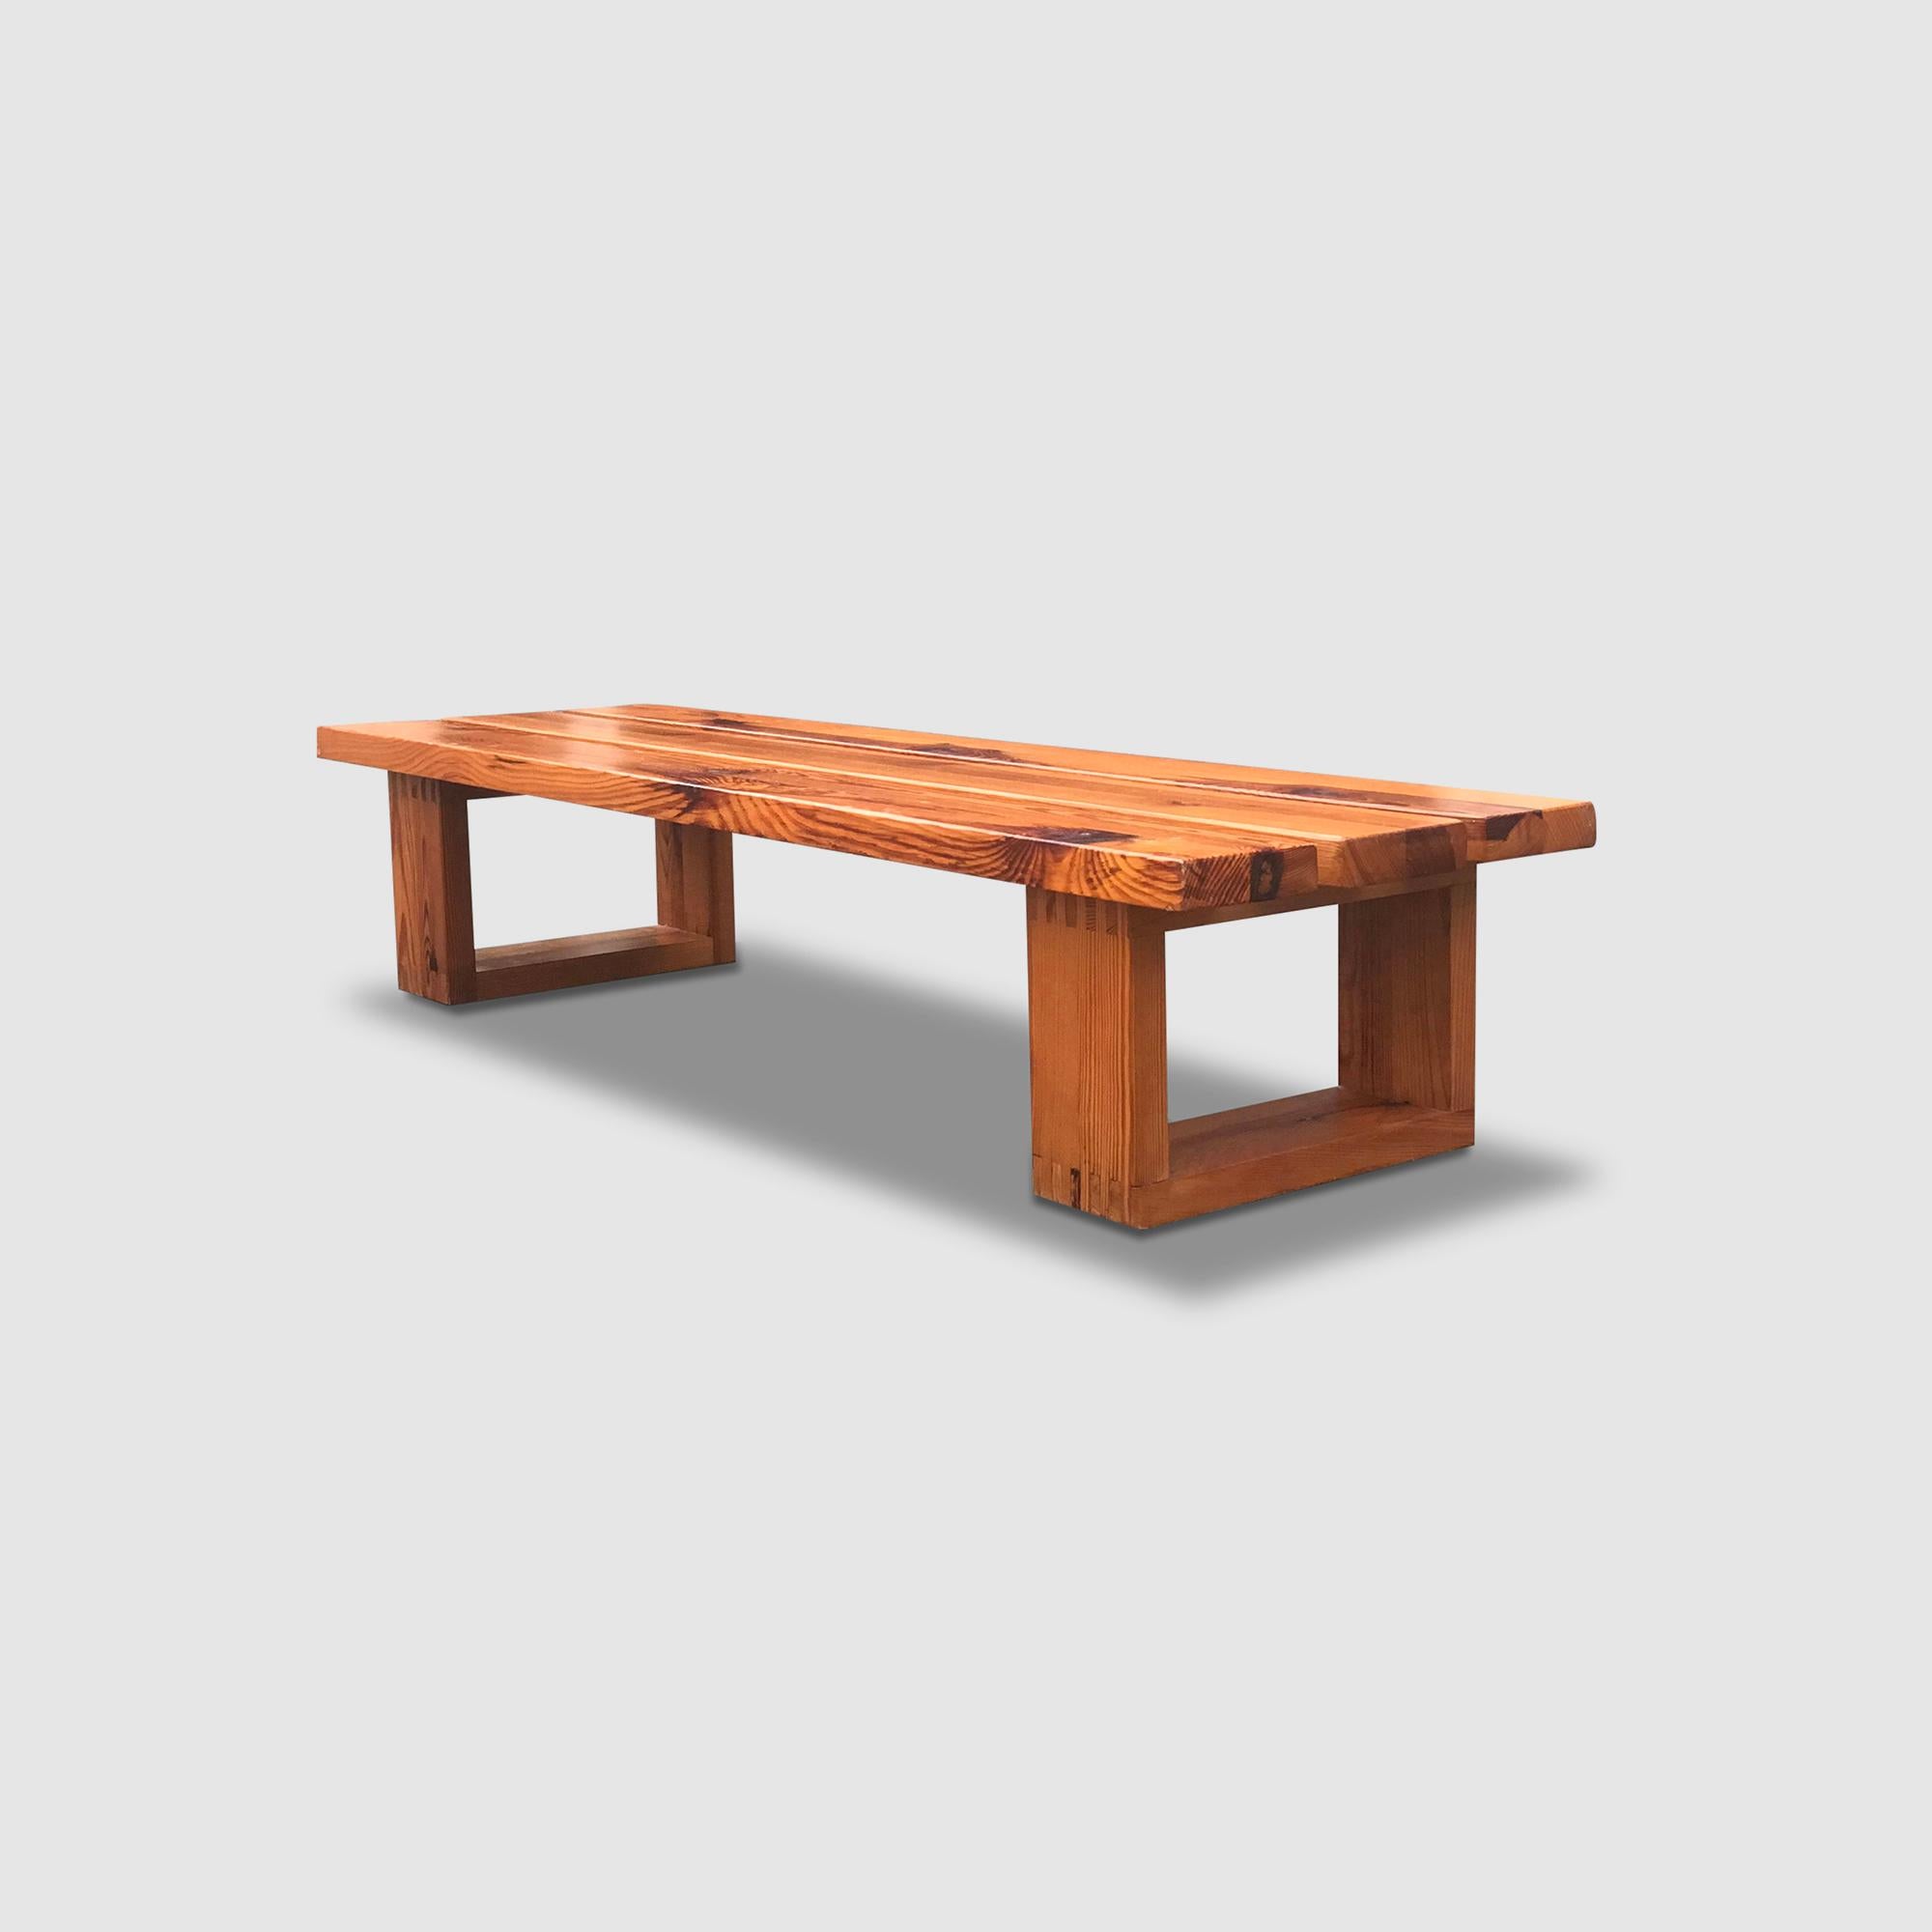 Pine slatted bench by Ate van Apeldoorn for Houtwerk Hattem.

In typical Van Apeldoorn fashion; built solid and with beautiful details, such as the wood connection on the feet.

The square shaped feet are connected to 3 long rectangular slats.

Very